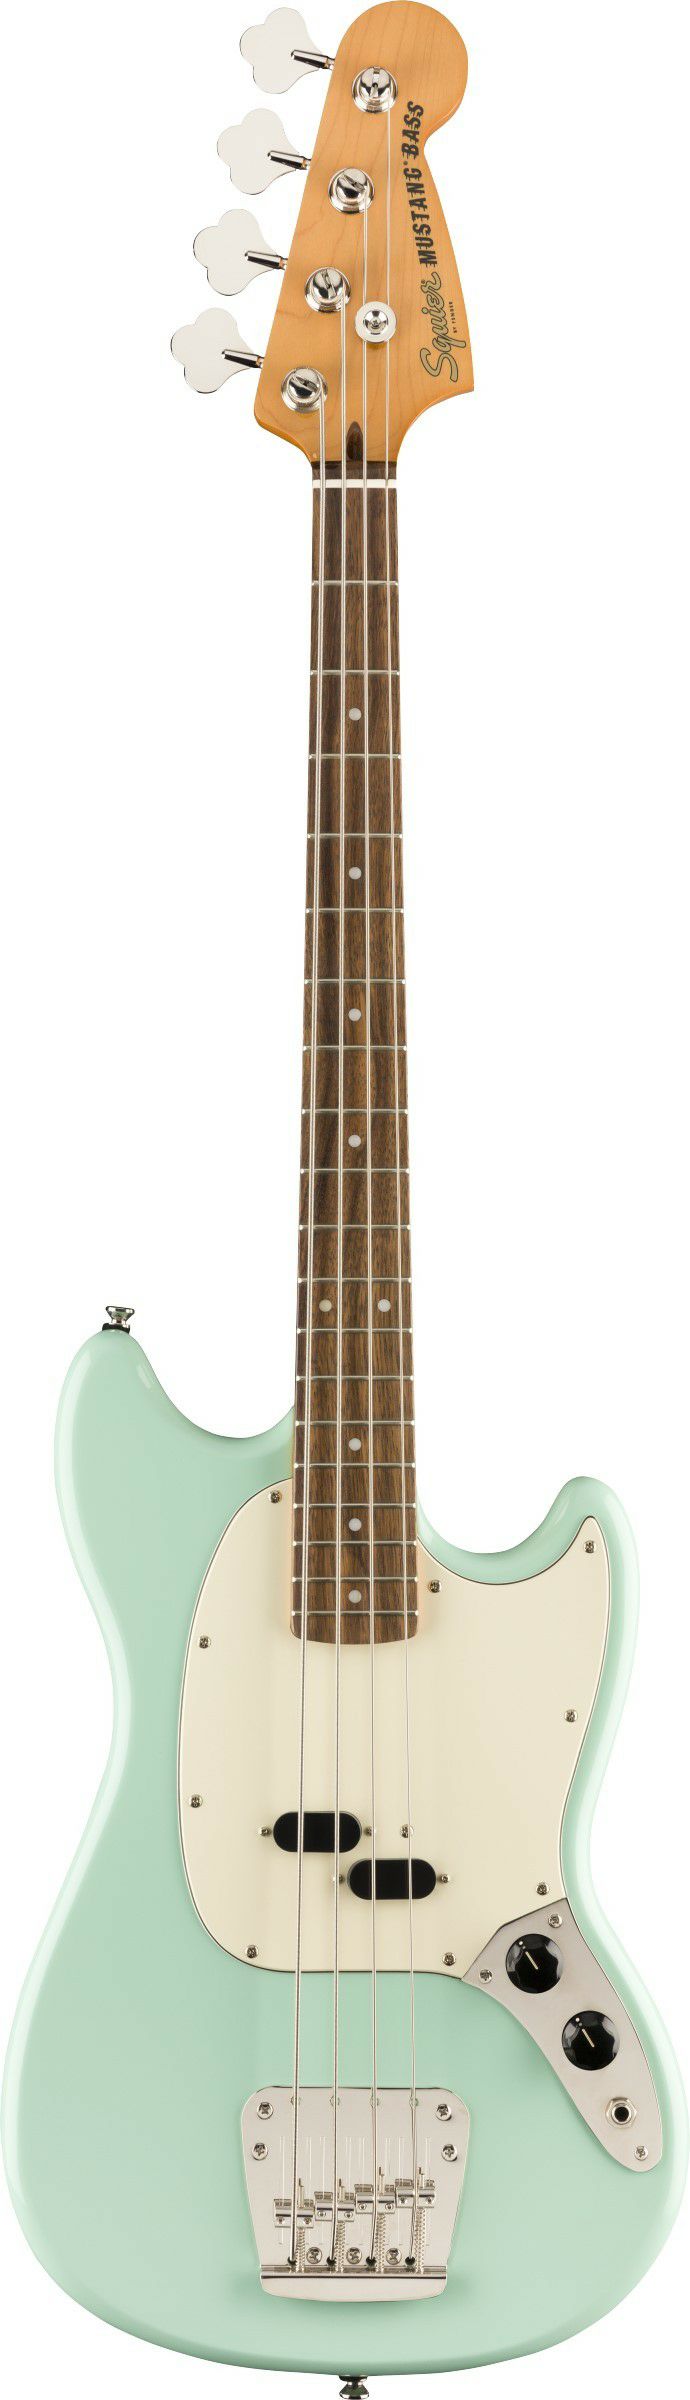 Squier by Fender Classic Vibe '60s Mustang® Bass Laurel Fingerboard Surf  Green スクワイヤー ムスタングベース サーフグリーン | JEUGIA